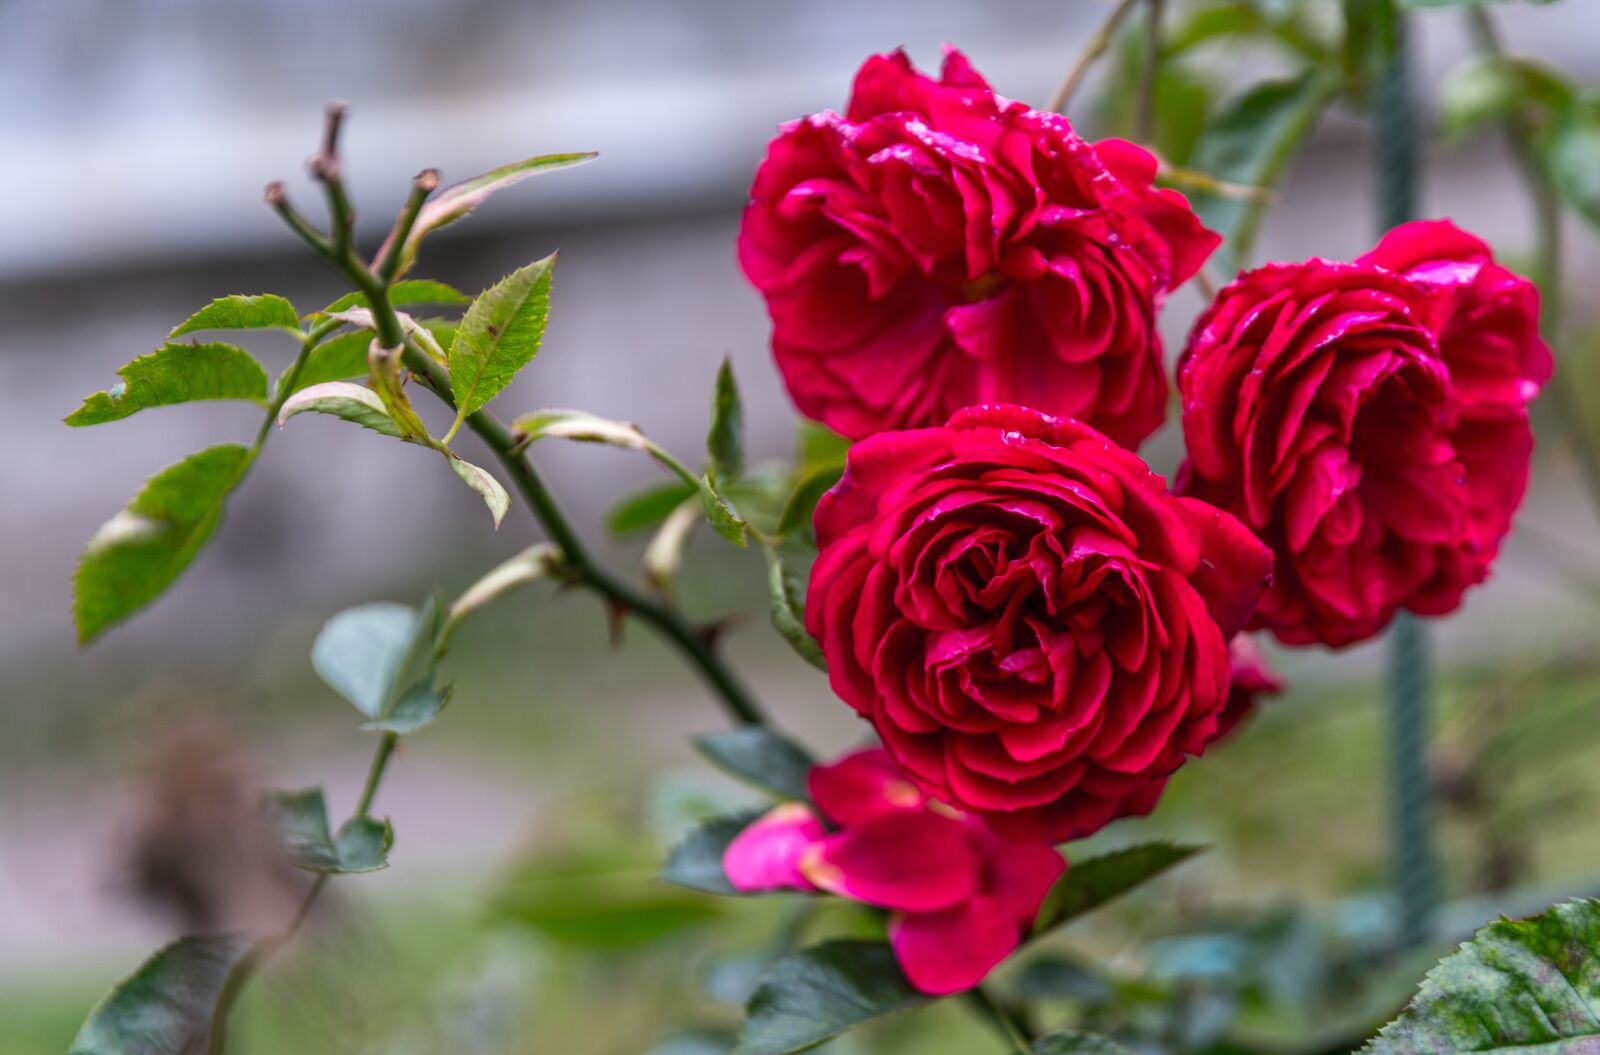 Sony a7R II sample photo. Rose, flower, nature photography